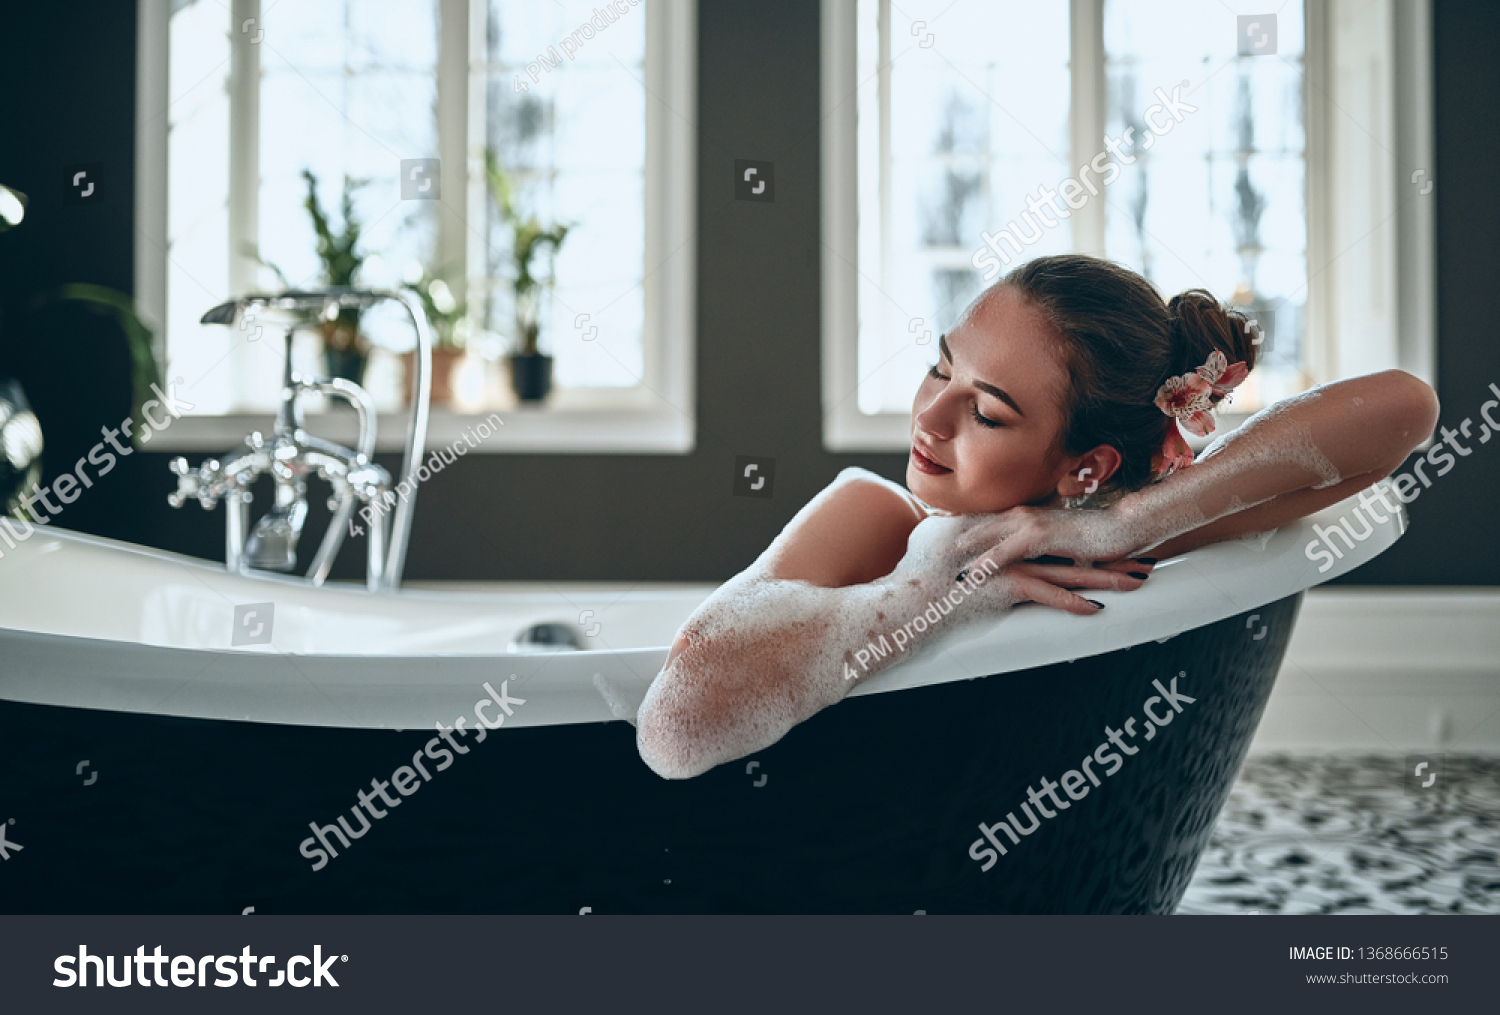 Attractive Sexy Woman Lying Naked Bath Stock Photo 1368666515